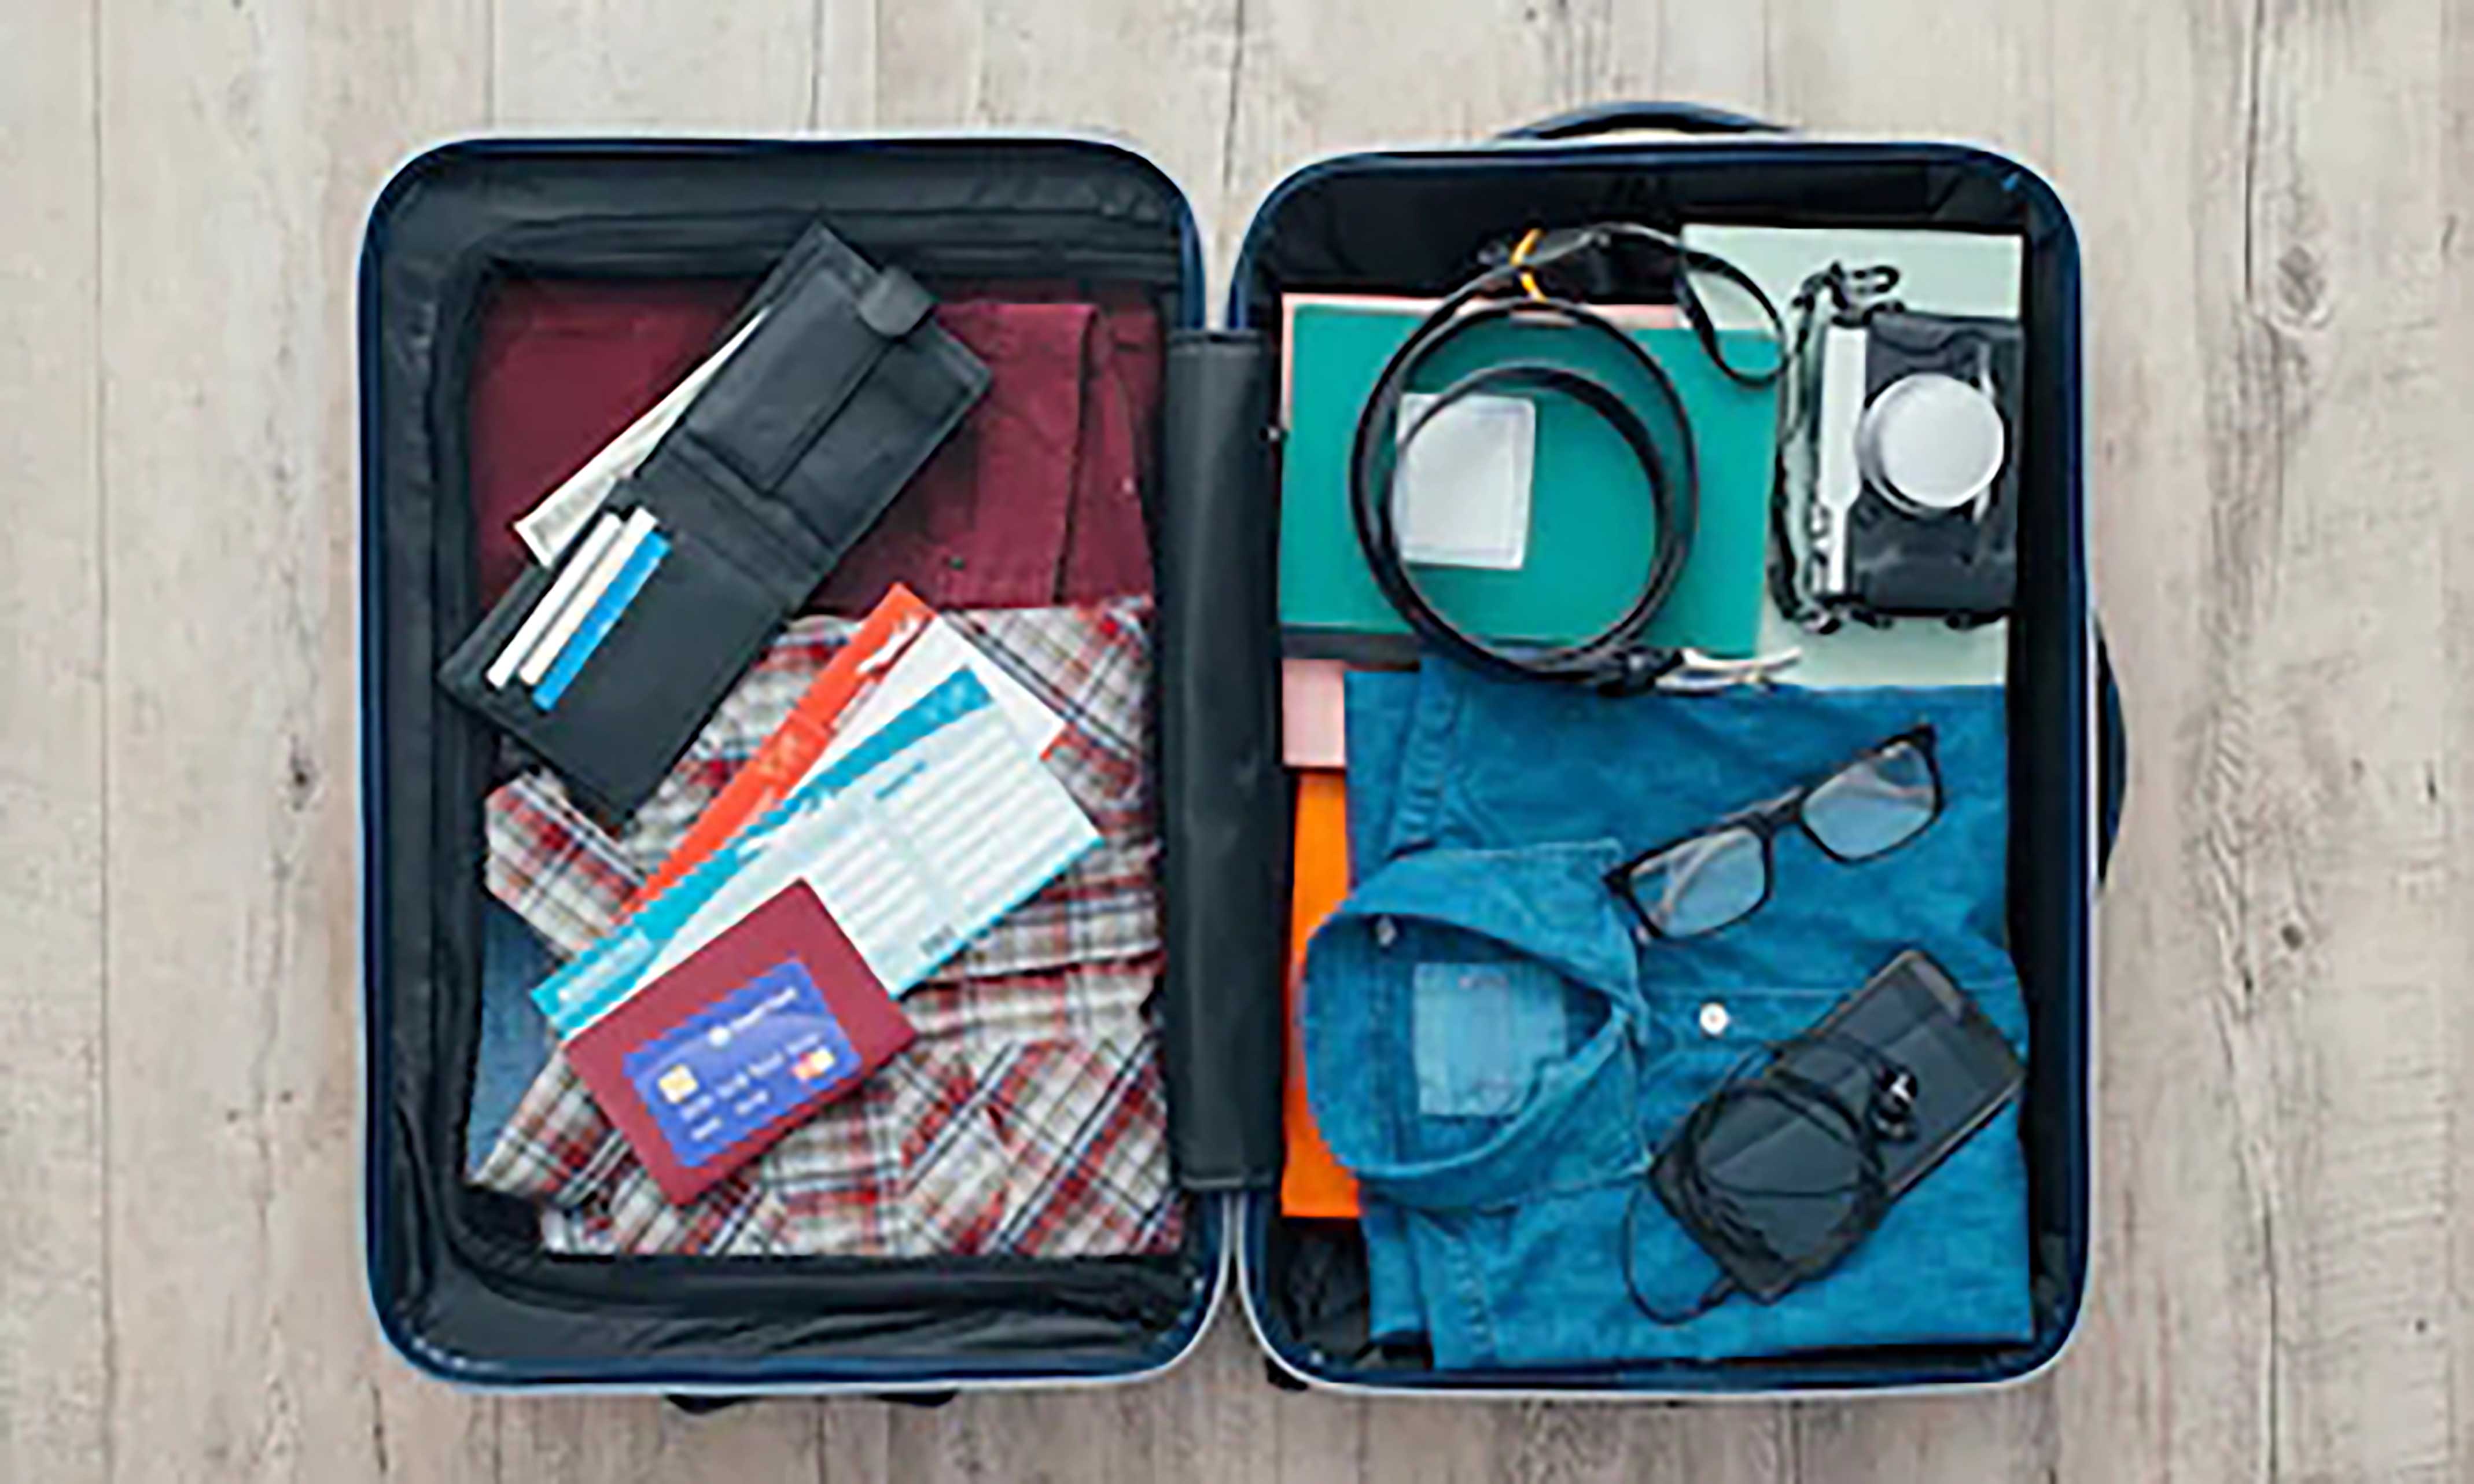 Travel accessories become increasingly popular in China